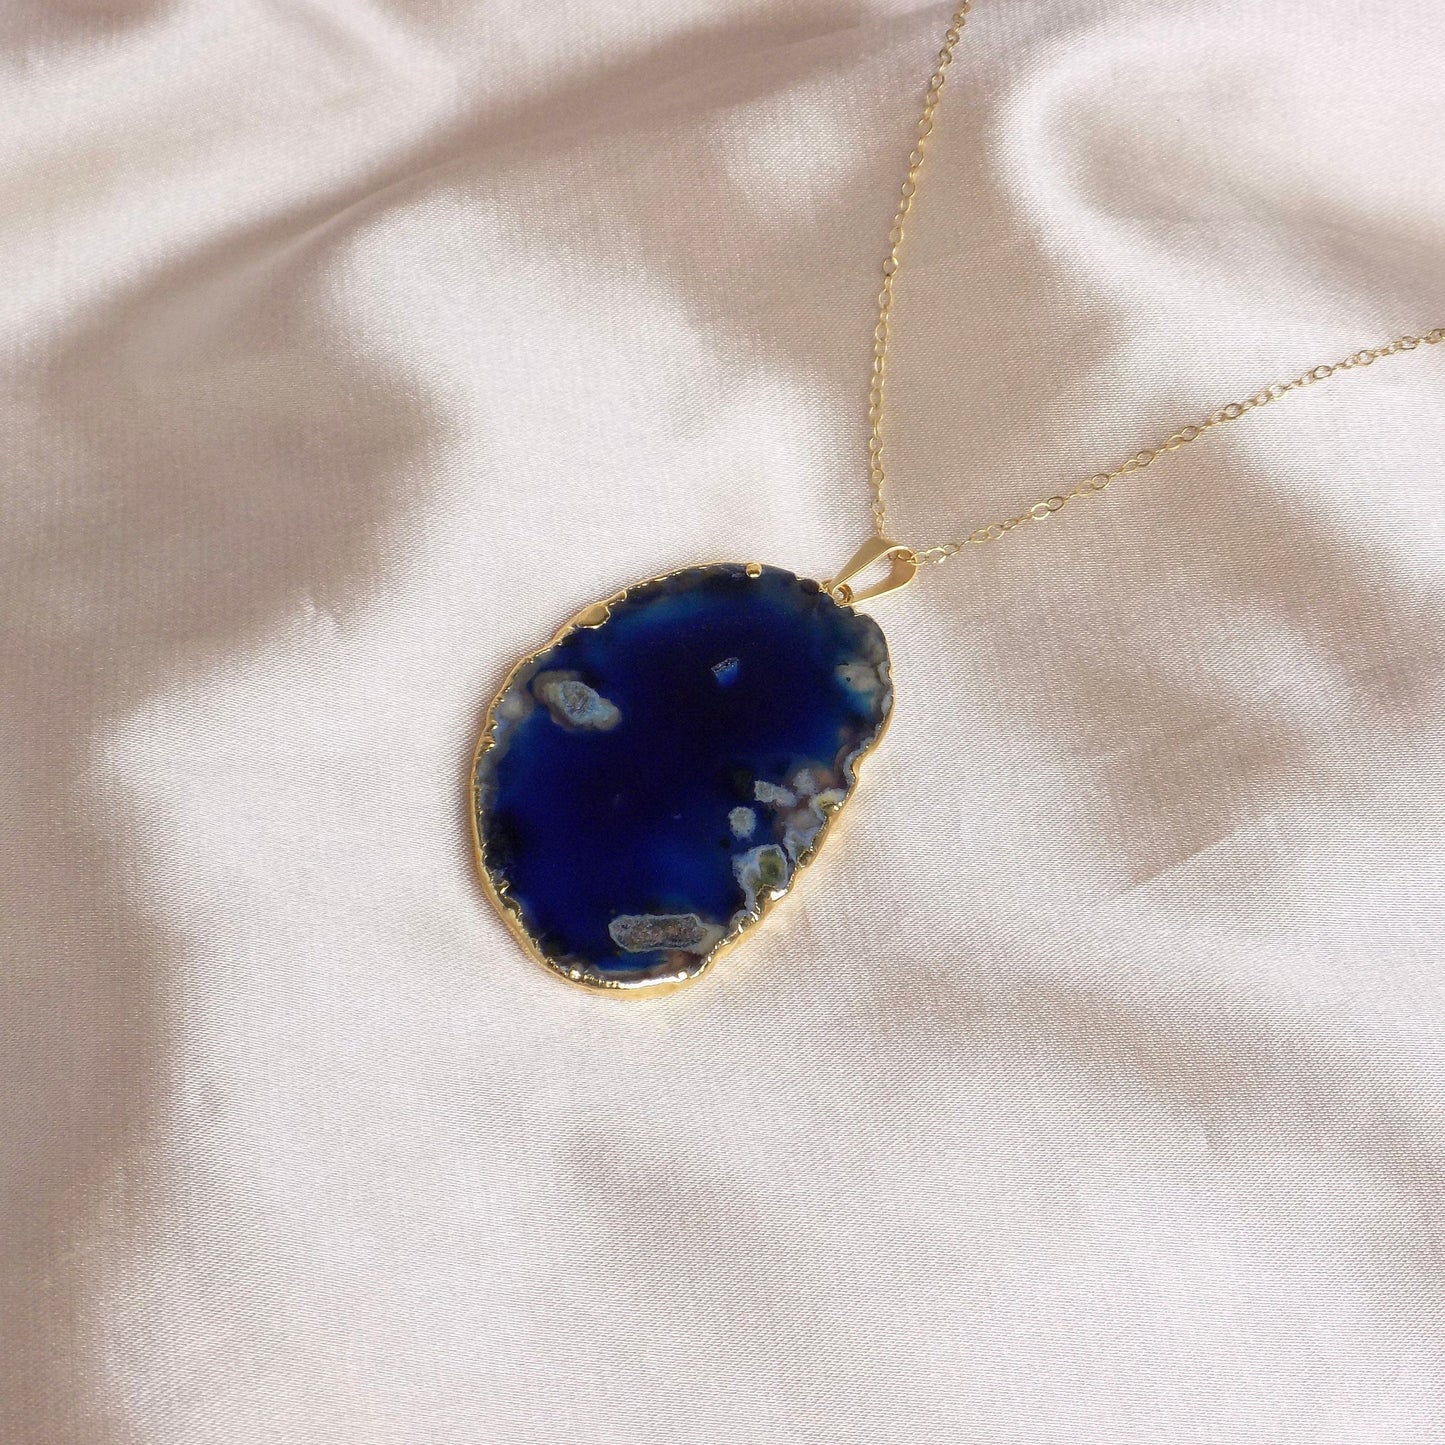 Blue Slice Agate Necklace, Sliced Agate Pendant, Gold Necklace, Boho Necklace, Geode Necklace, Layering Necklace, Gift, Raw Stone, G11-722